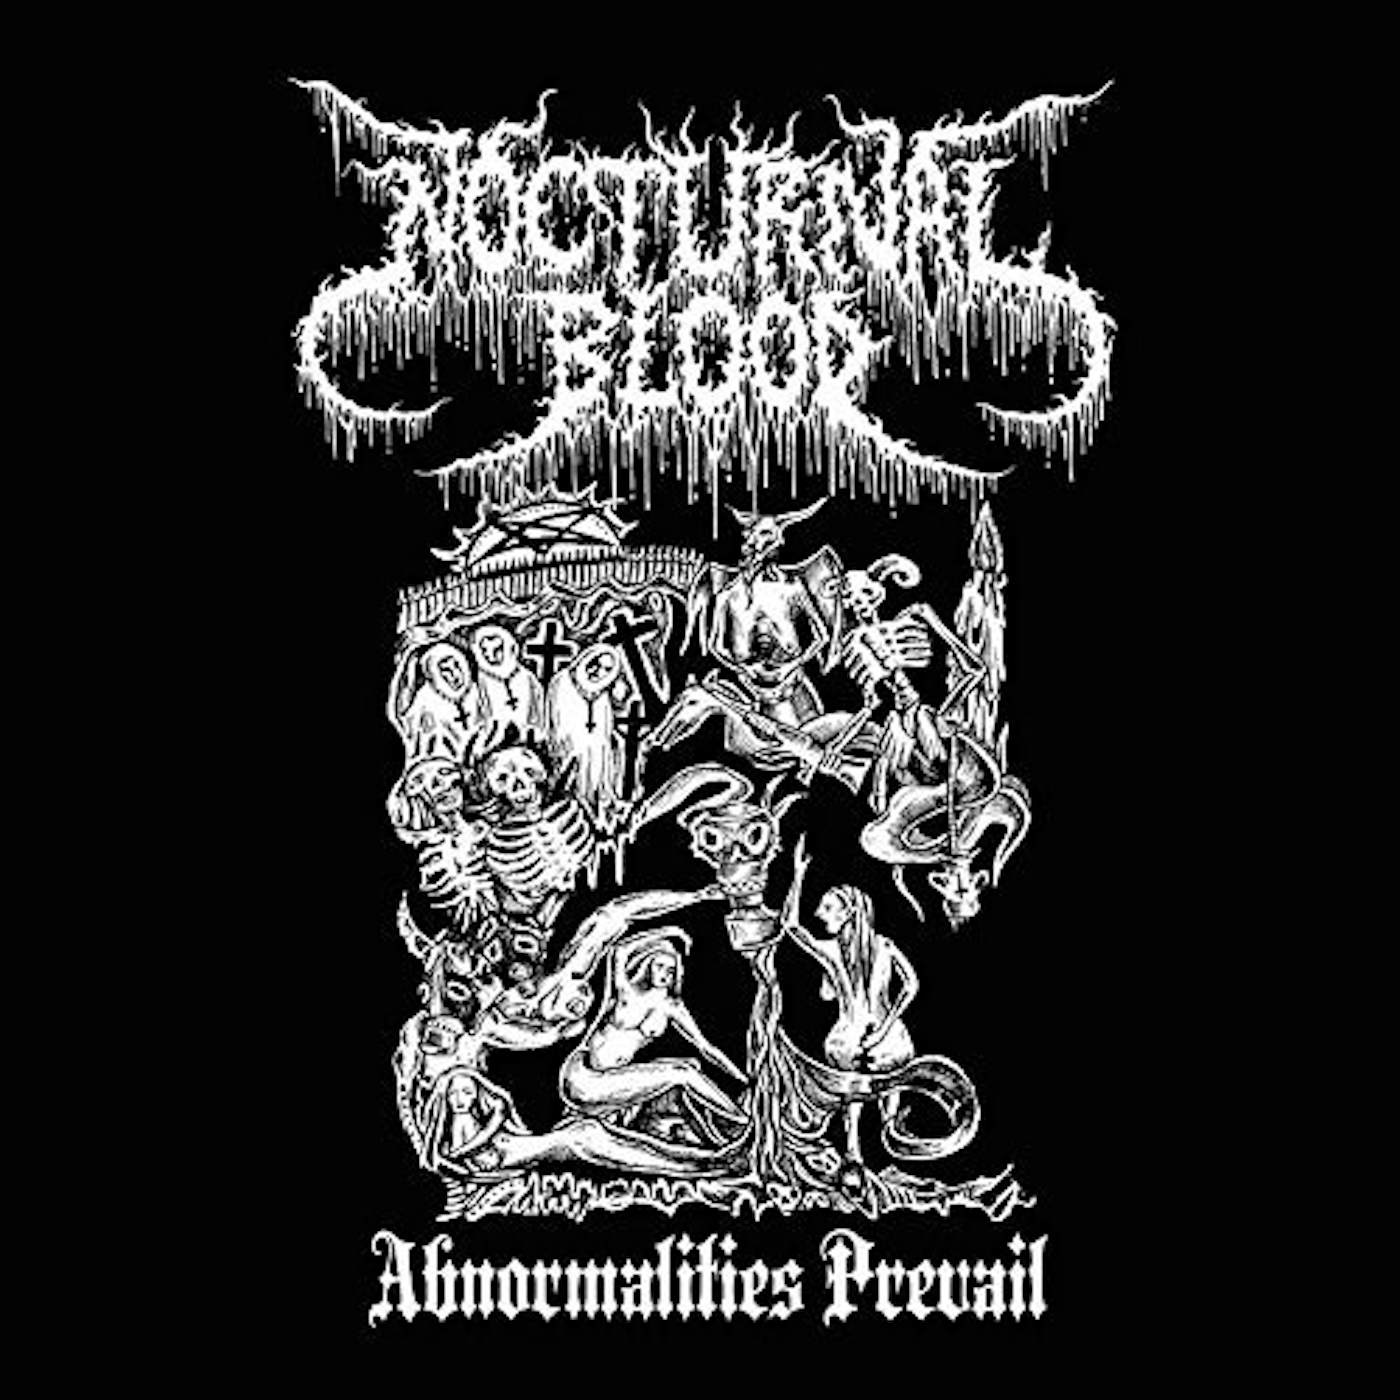 Nocturnal Blood Abnormalities Prevail Vinyl Record